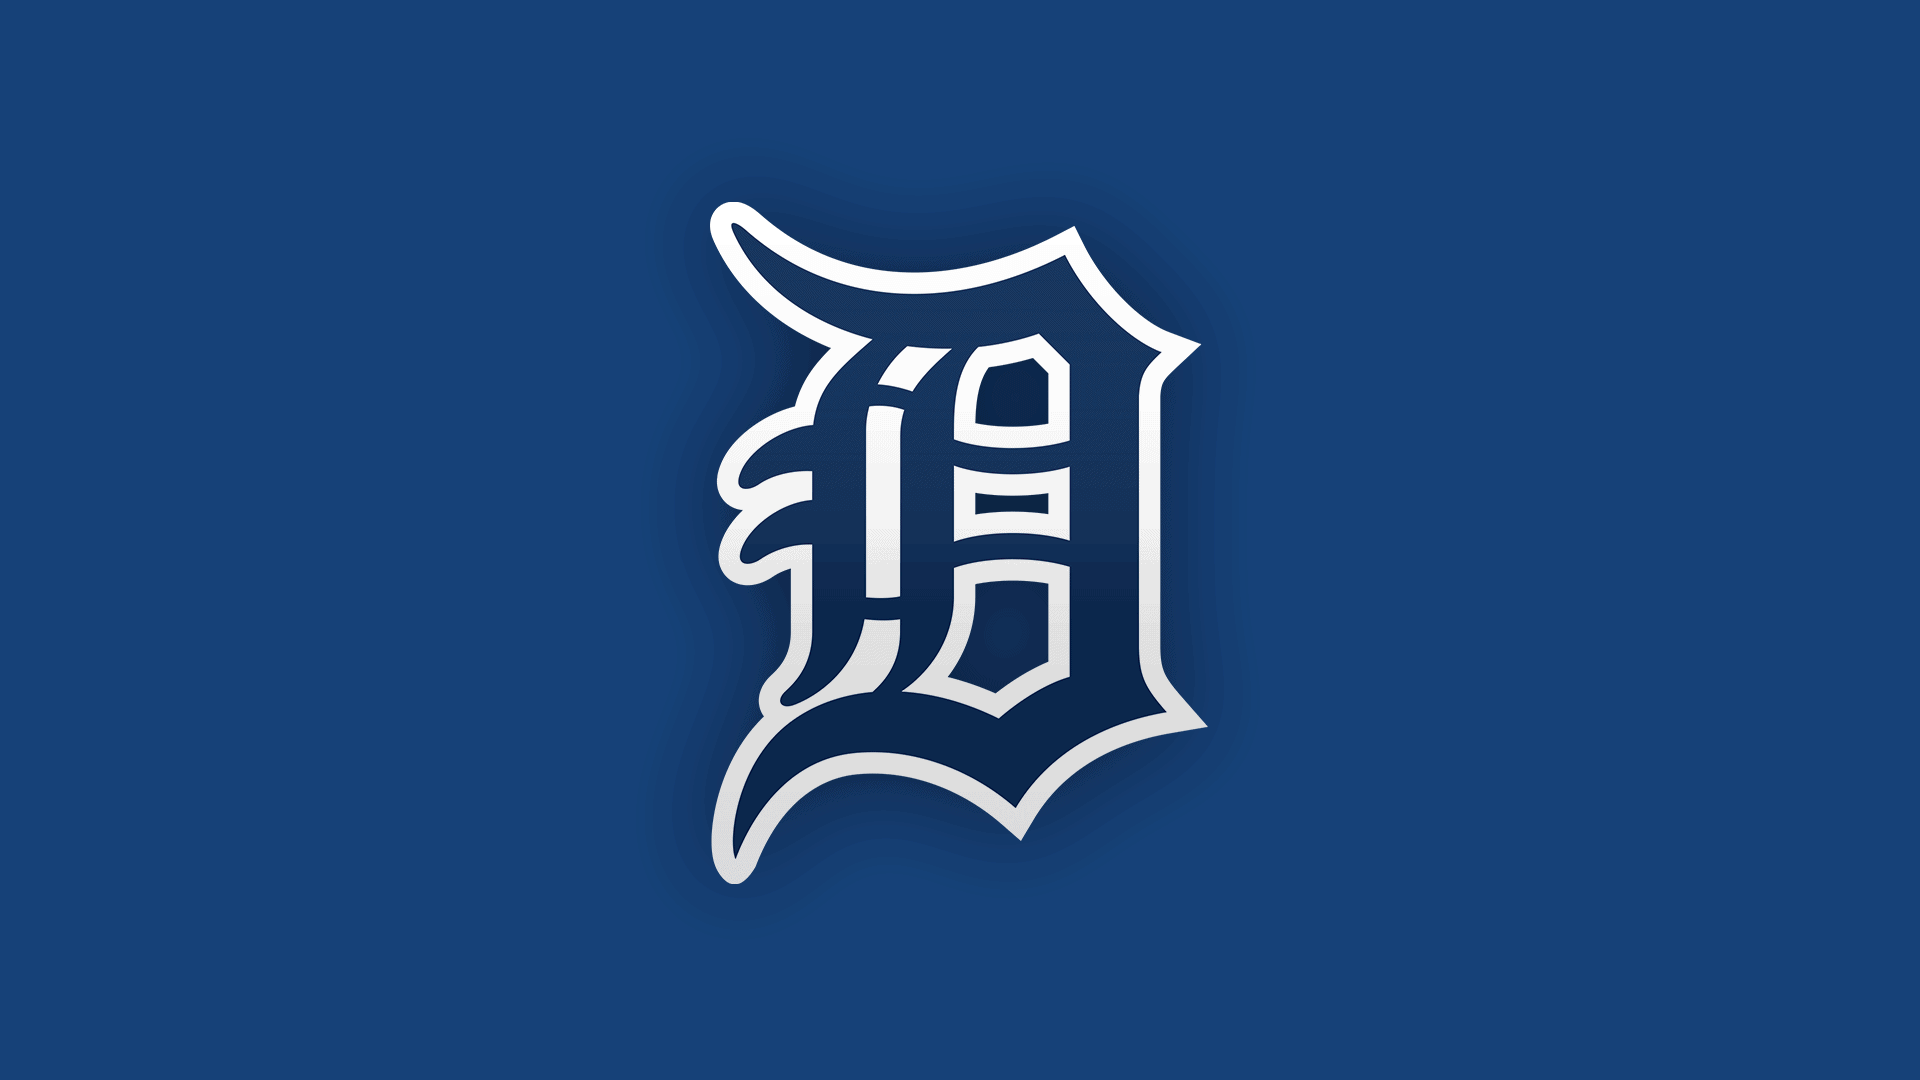 Detroit Tigers Odds Beer Girl Joey Wentz Tyler Holton Luis Santana Tim Naughton Rich Hill Joe Rizzo Miami Marlins Blair Calvo Detroit Tigers Top Prospects Tyler Nevin Riley Greene Spencer Torkelson Isan Diaz Detroit Tigers to call up Sawyer Gibson-Long 2024 Detroit Tigers Opening Day Lineup Detroit Tigers hire former World Series Champion Joey Cora Detroit Tigers earn bonuses